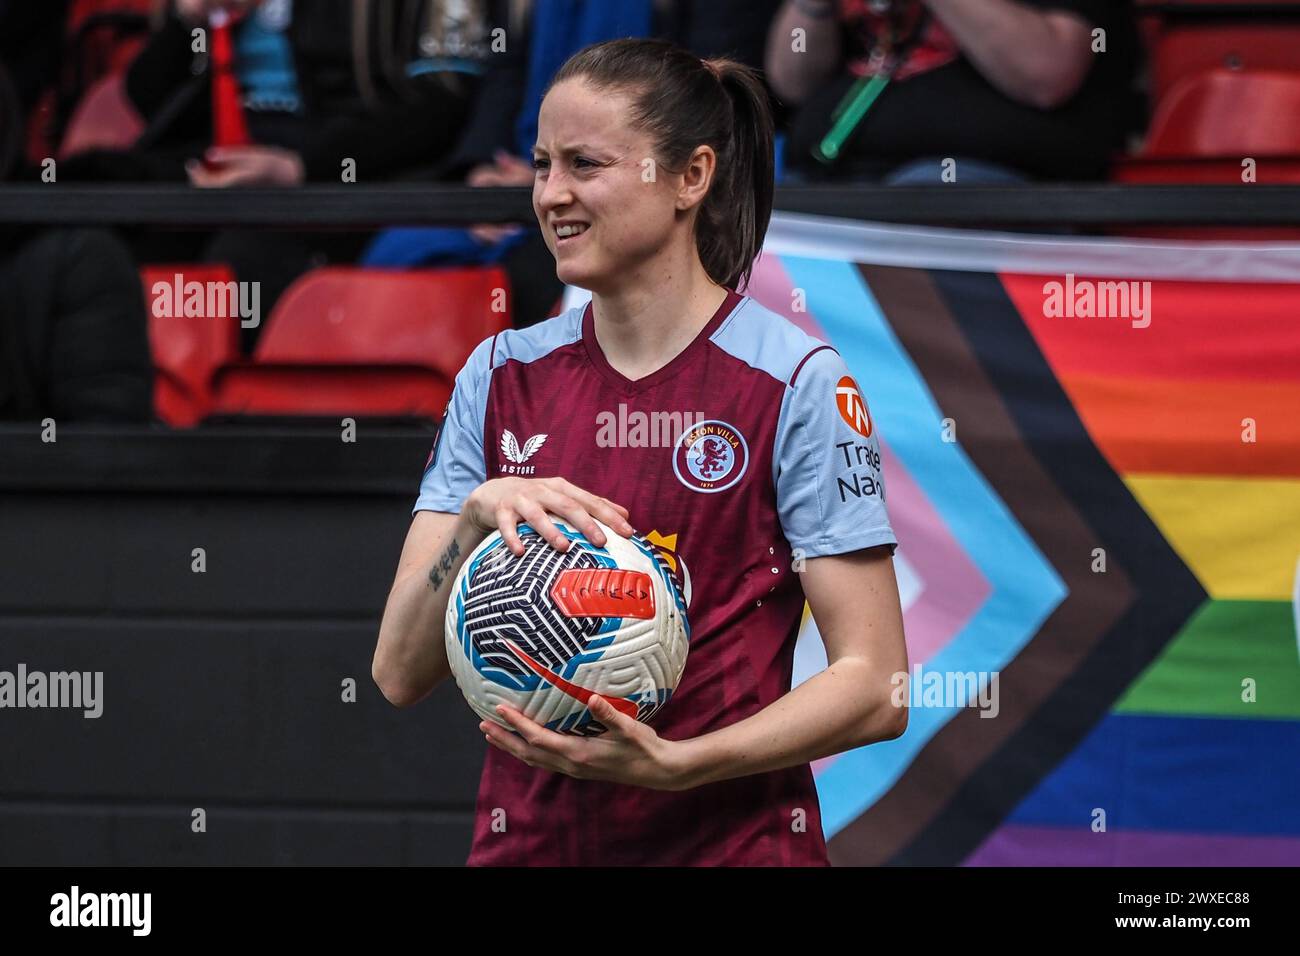 Walsall, UK. 30th Mar, 2024. Walsall, England, March 30th 2024: Danielle Turner (14 Aston Villa) takes a throw in during the Barclays FA Womens Super League game between Aston Villa and Leicester City at the Poundland Bescot Stadium in Walsall, England (Natalie Mincher/SPP) Credit: SPP Sport Press Photo. /Alamy Live News Stock Photo